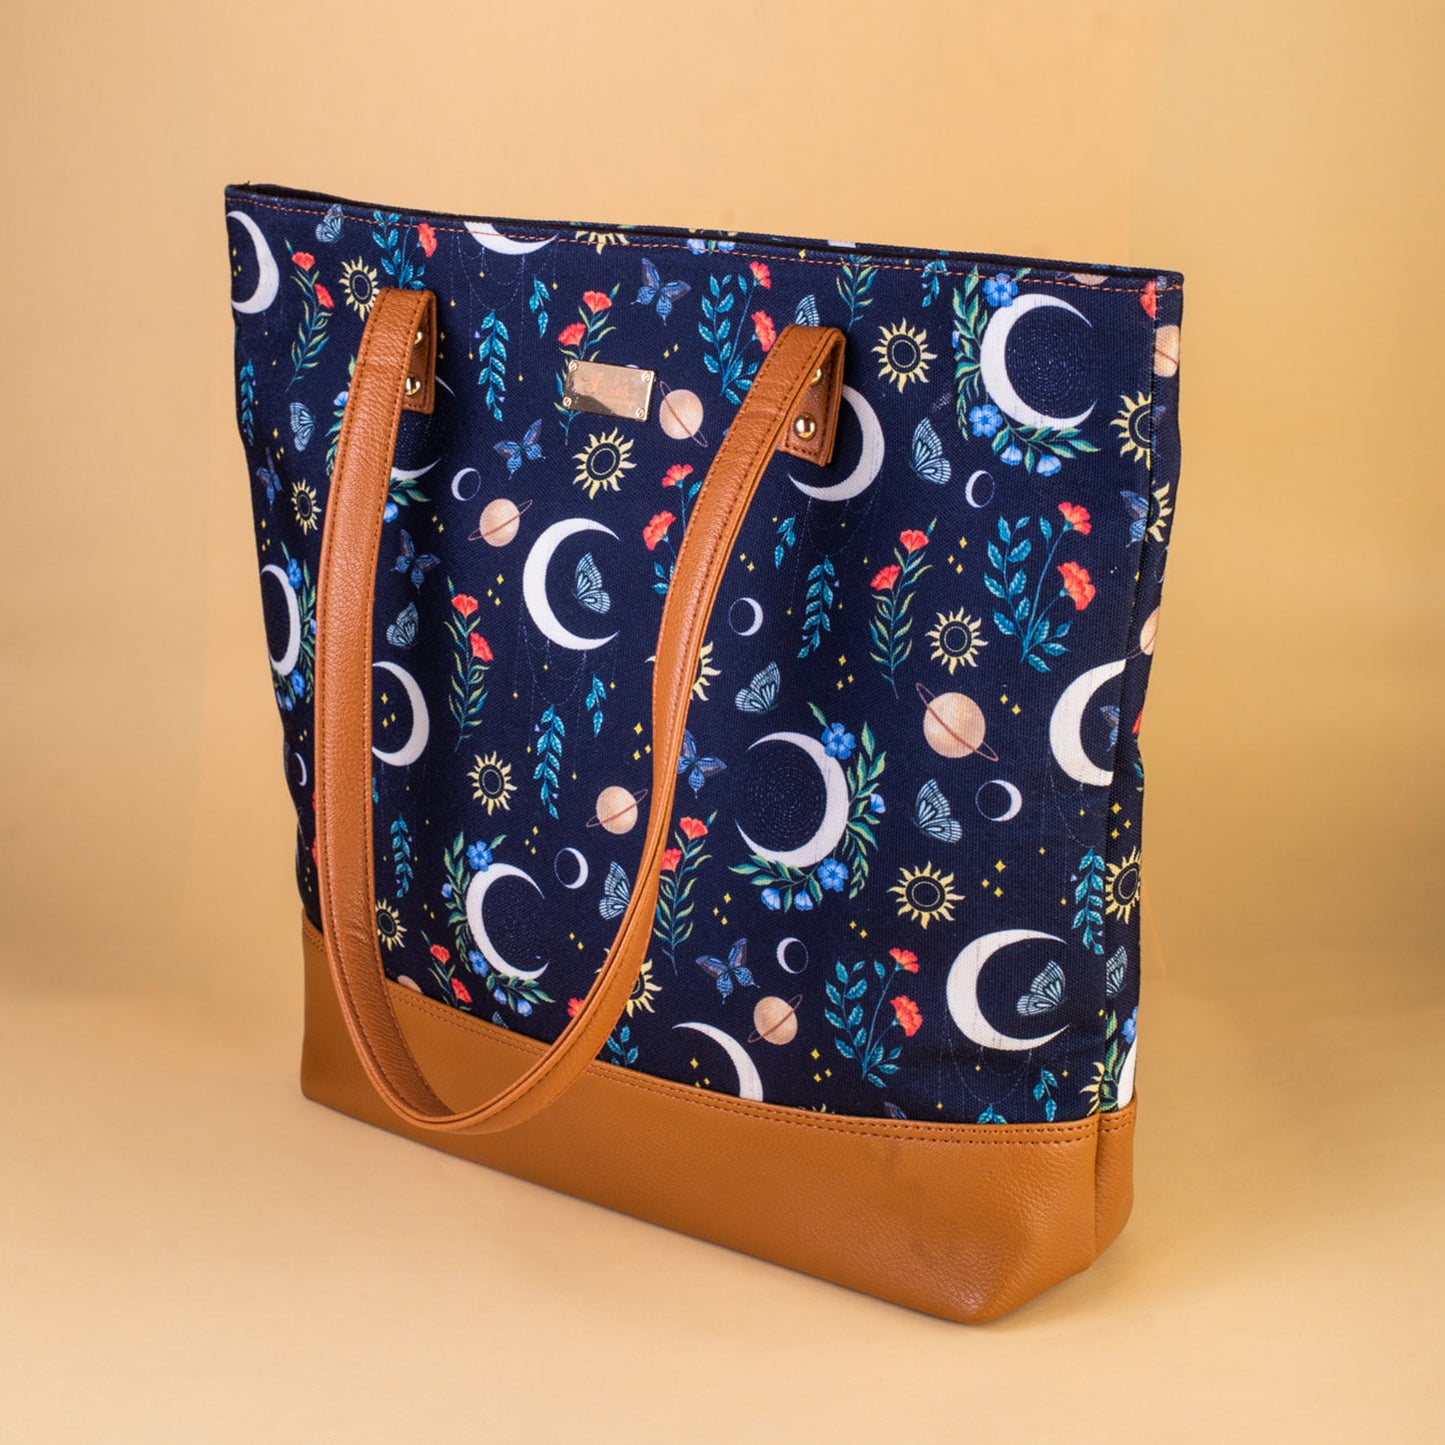 The Moon Child Tote Bag